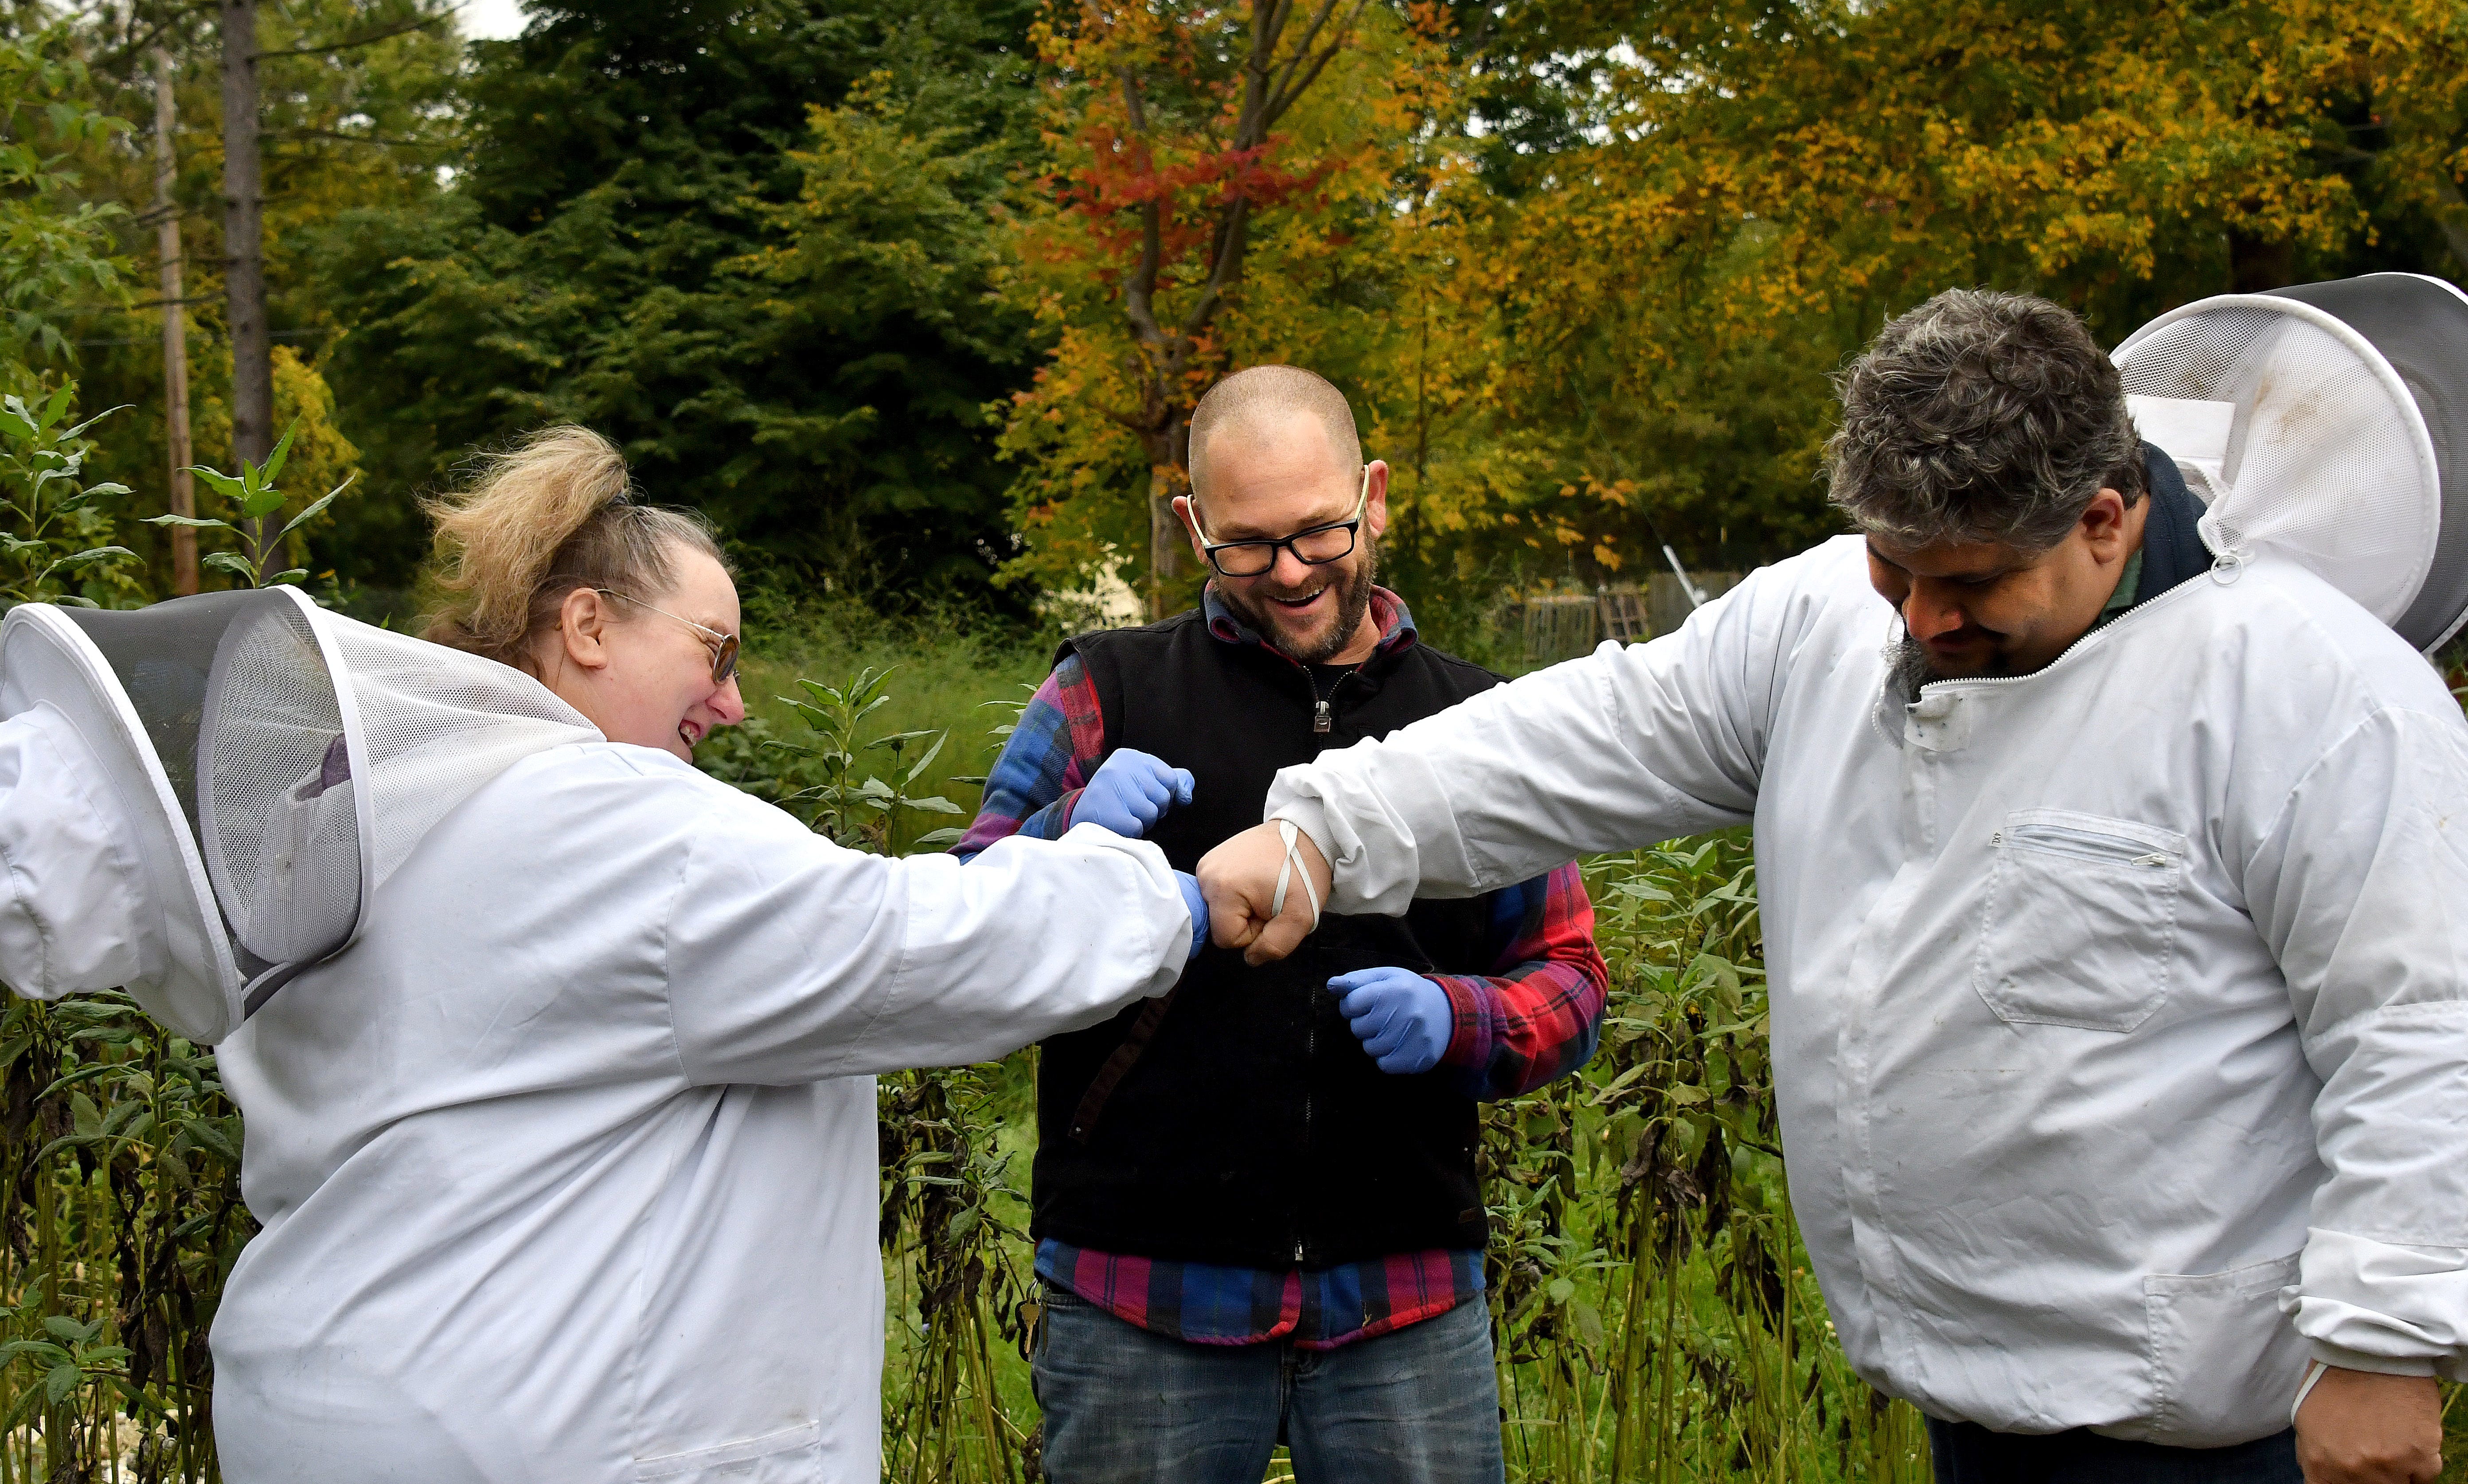 Adam Ingrao (center) jokes and fist-bumps with Marine veteran Tom Kusar (right) and US Army veteran Marie Jaegers in an urban garden on Oct 12, 2018 in Lansing. The fist bump came when Tom Kusar was told he was doing something right with his beekeeping program at home.